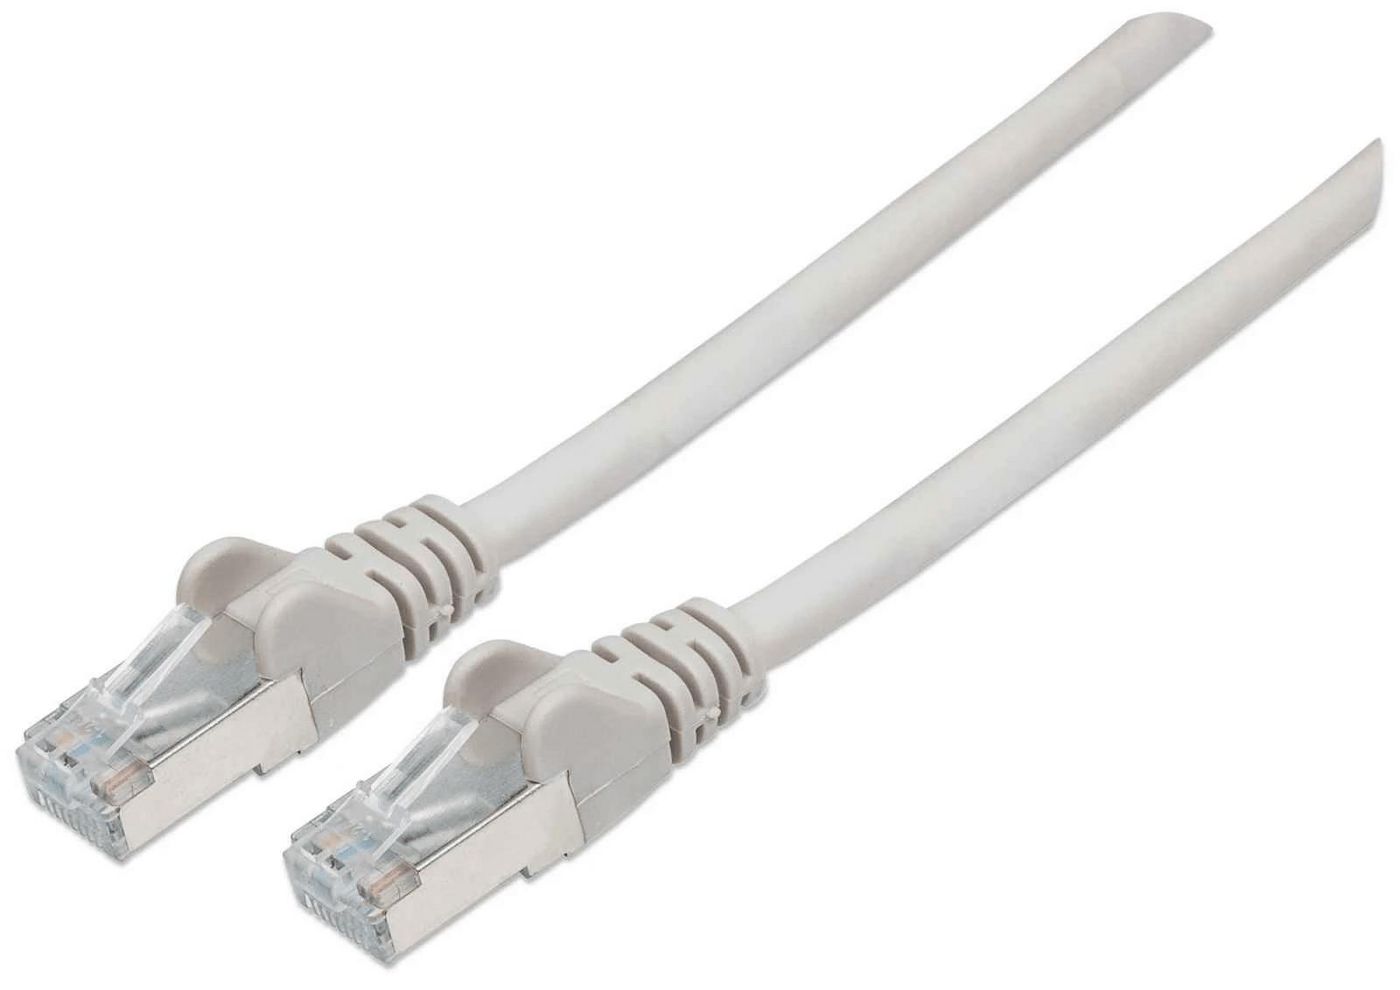 Intellinet 741156 High Performance Network Cable 